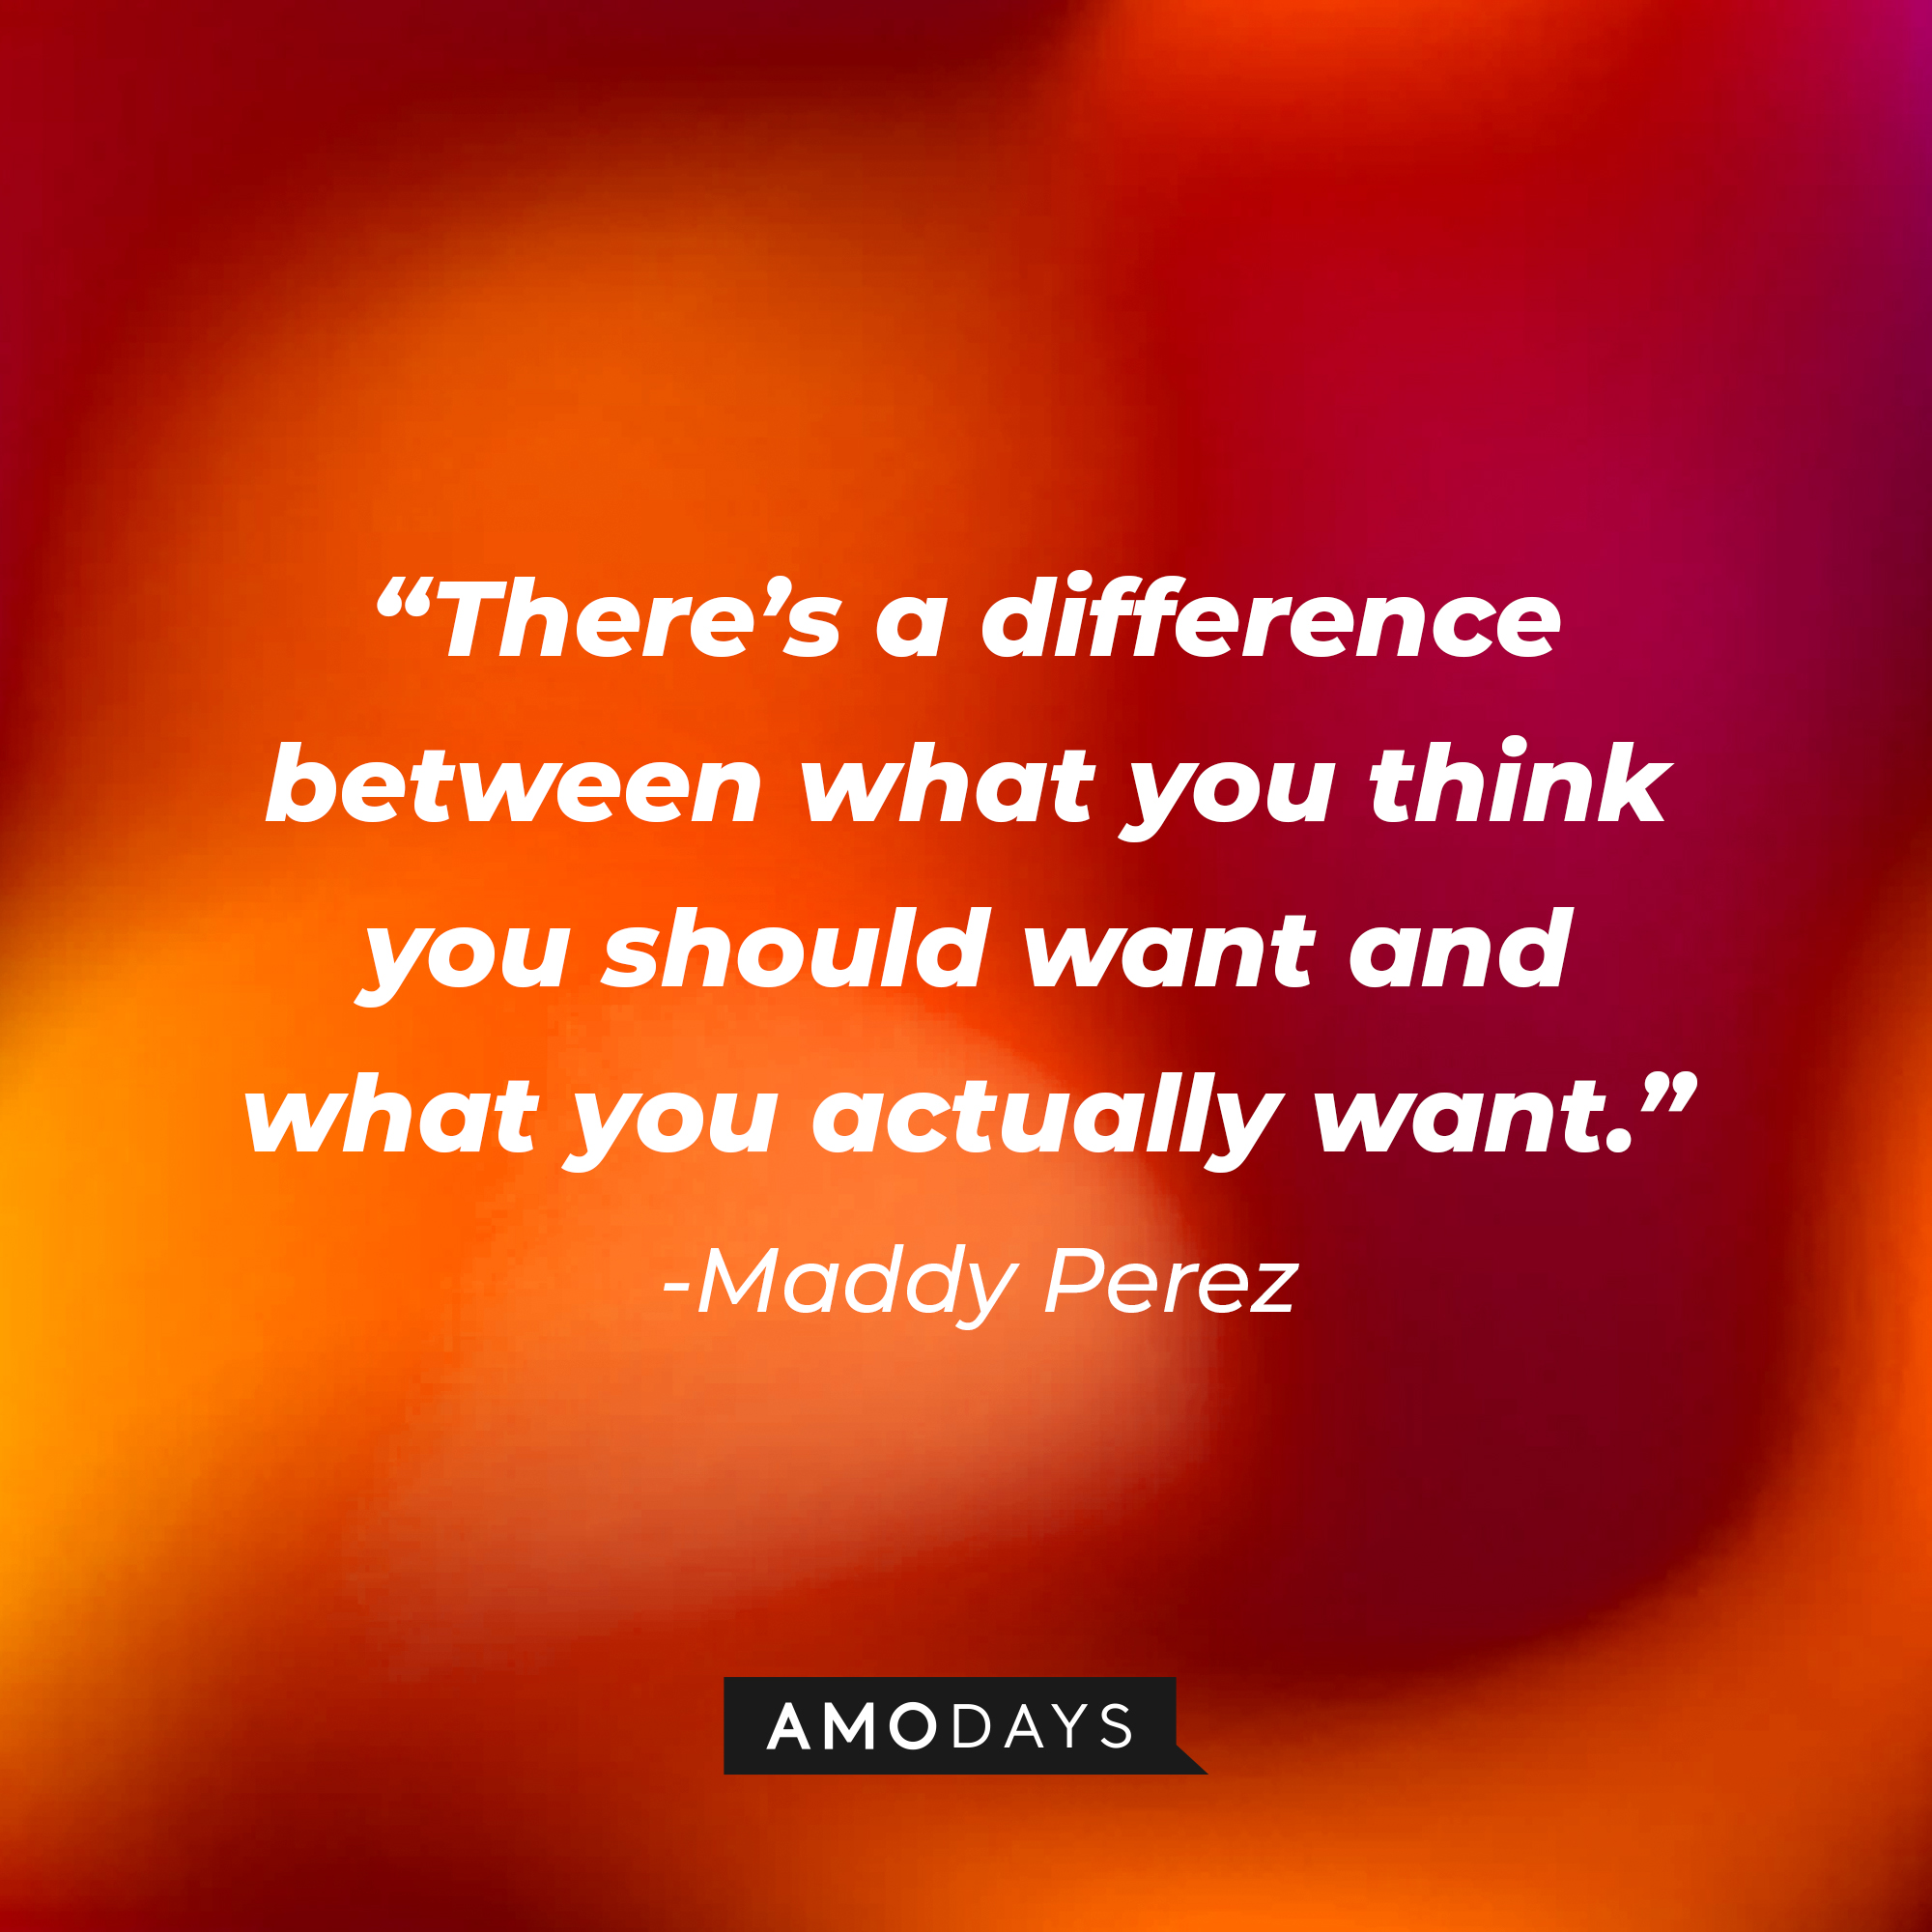 Maddy Perez’ quote: “There’s a difference between what you think you should want and what you actually want.” | Source: AmoDays